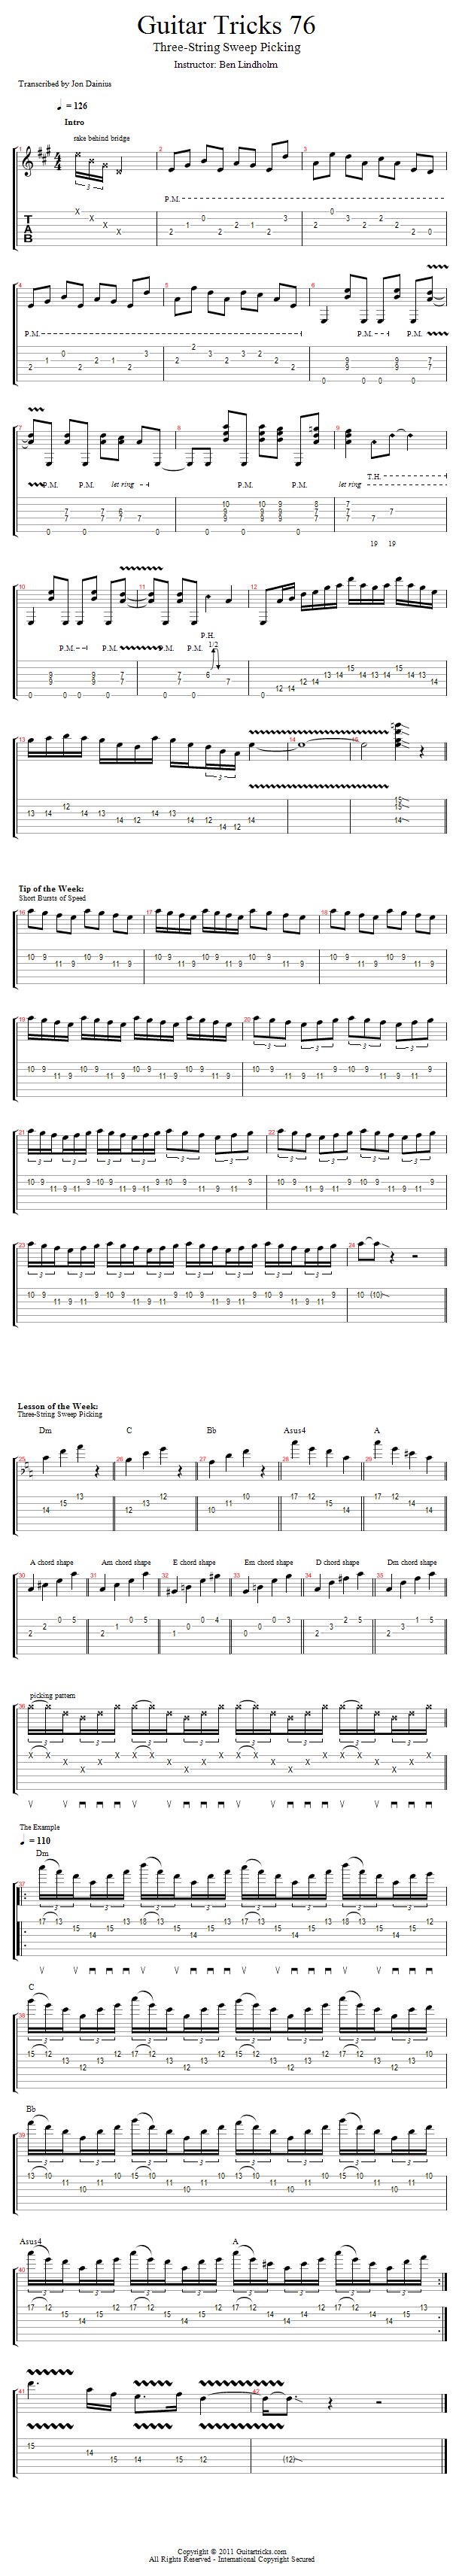 Guitar Tricks 76: 3-String Sweeps song notation